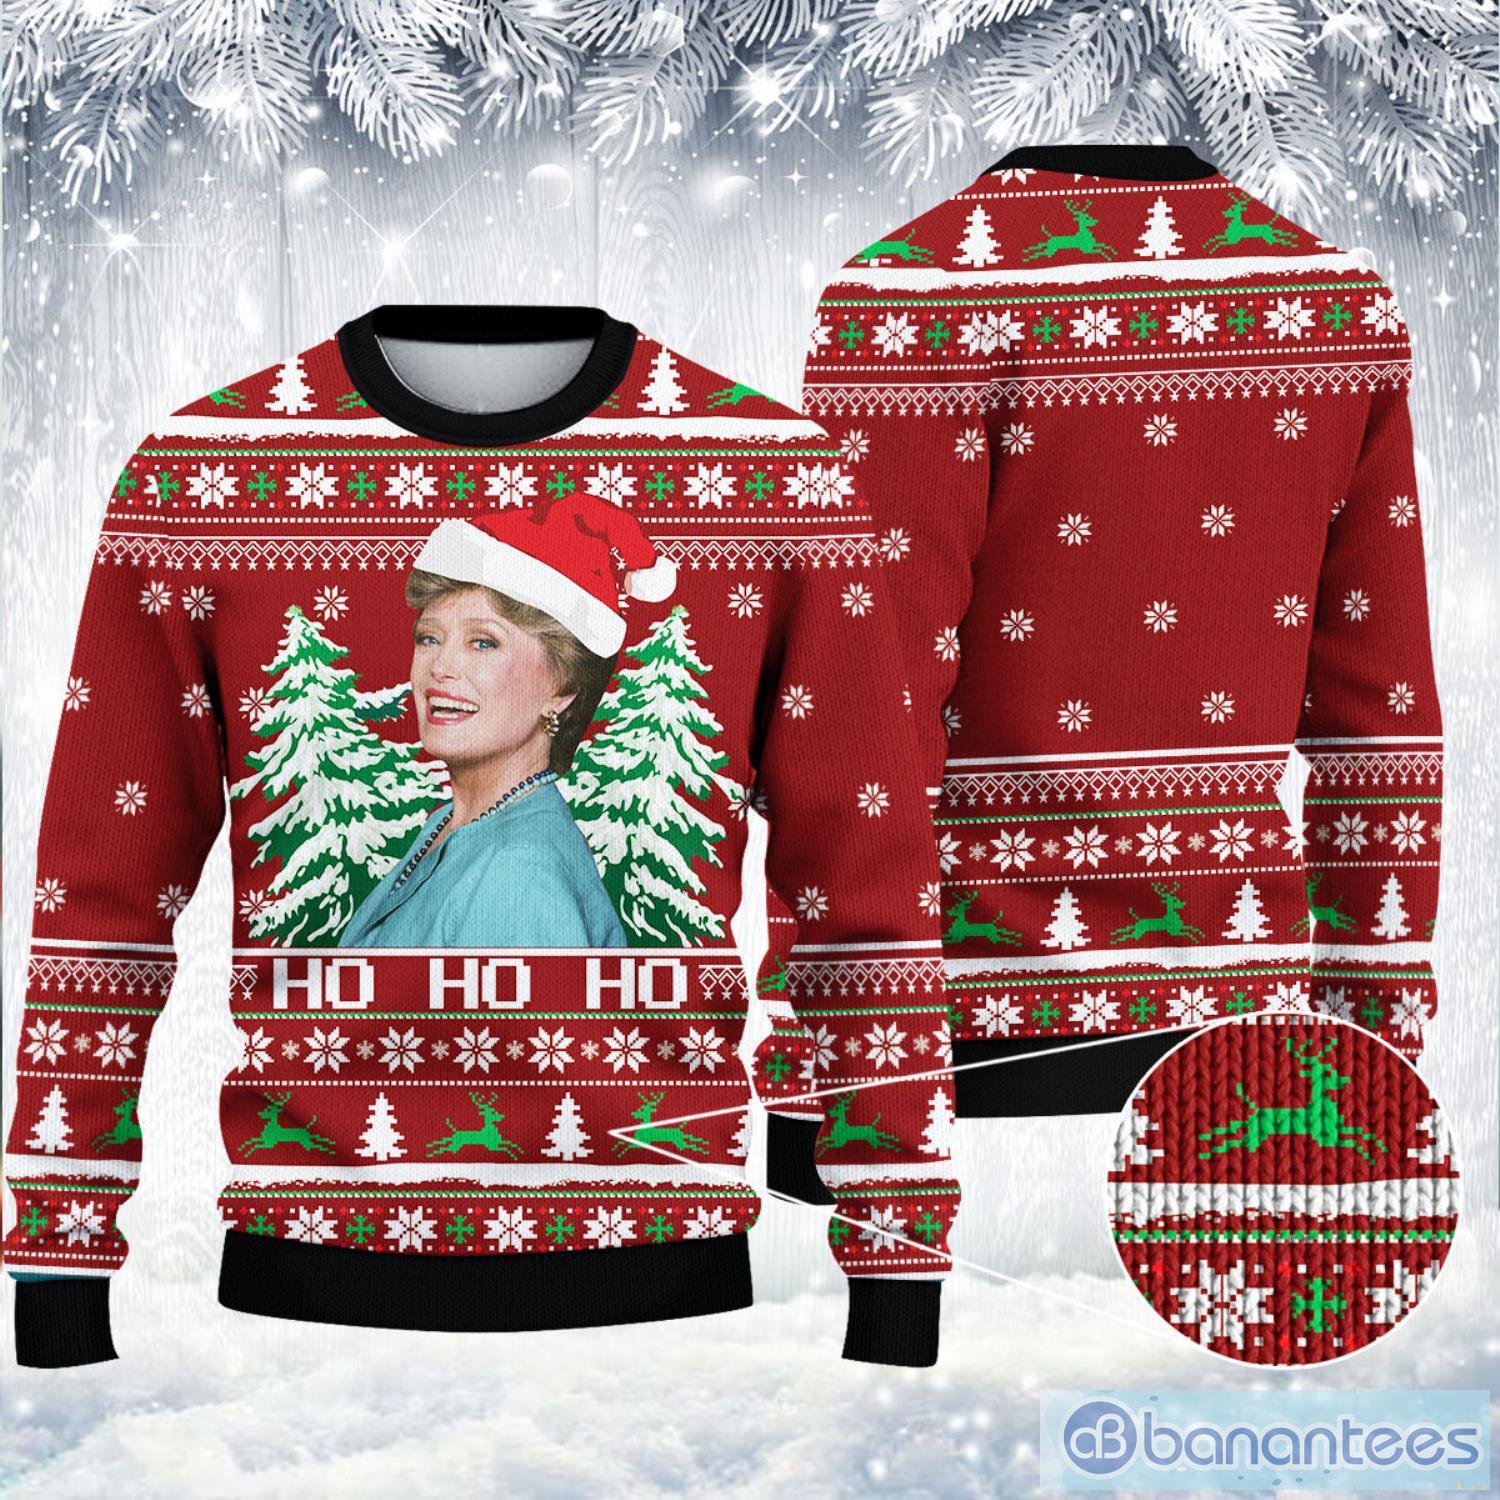 The Golden Girls Blanche Devereaux Christmas Ugly Christmas Sweater Product Photo 1